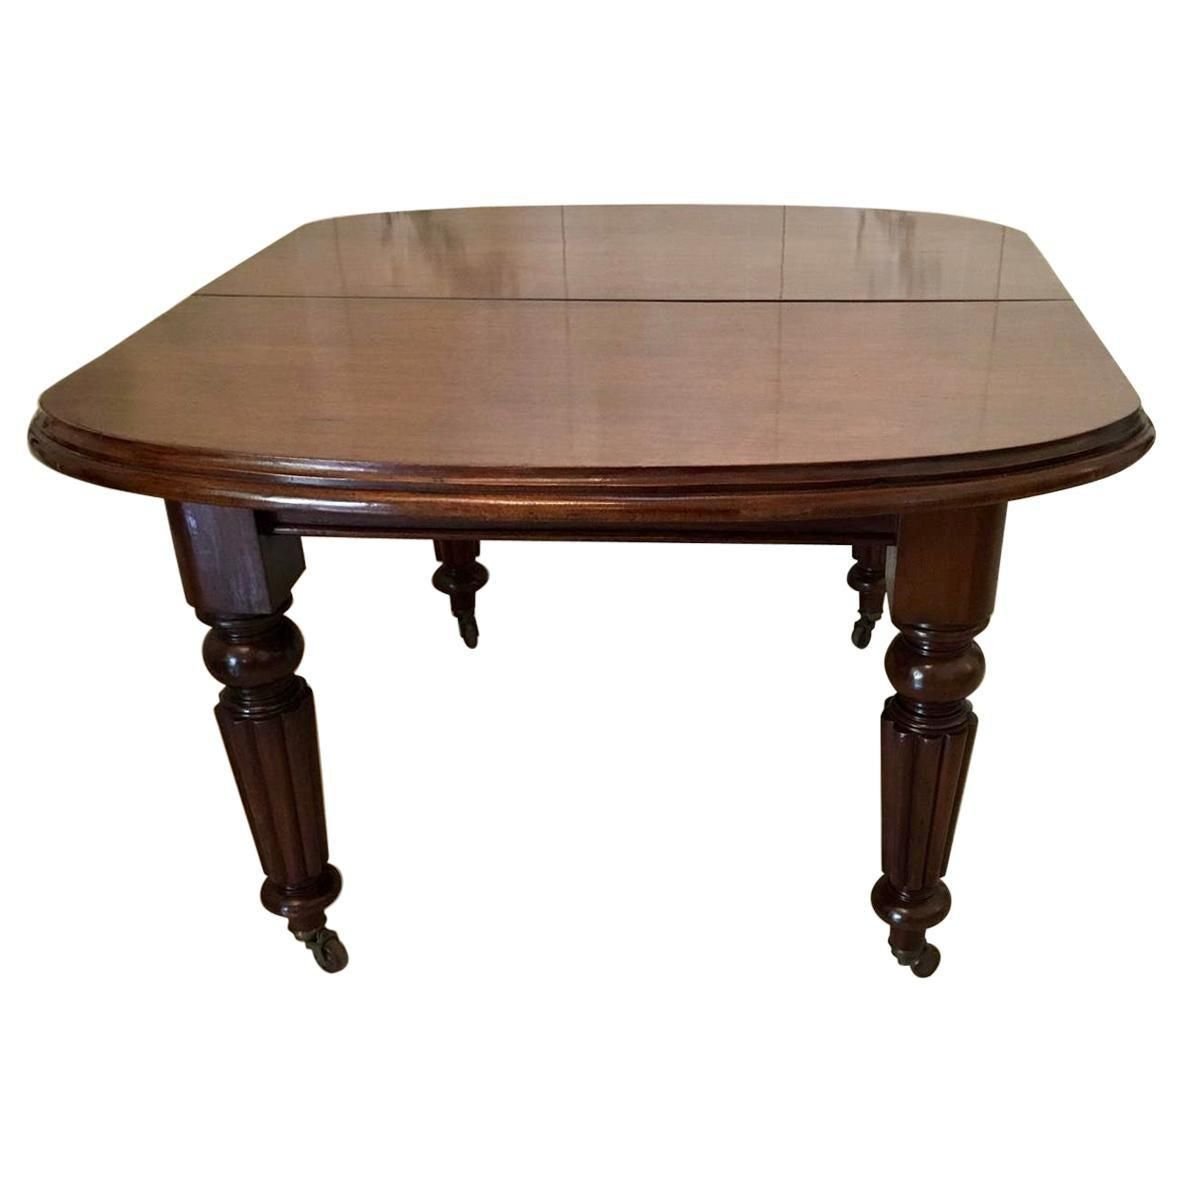 Antique Victorian Mahogany Extending Dining Table For Sale At Pamono